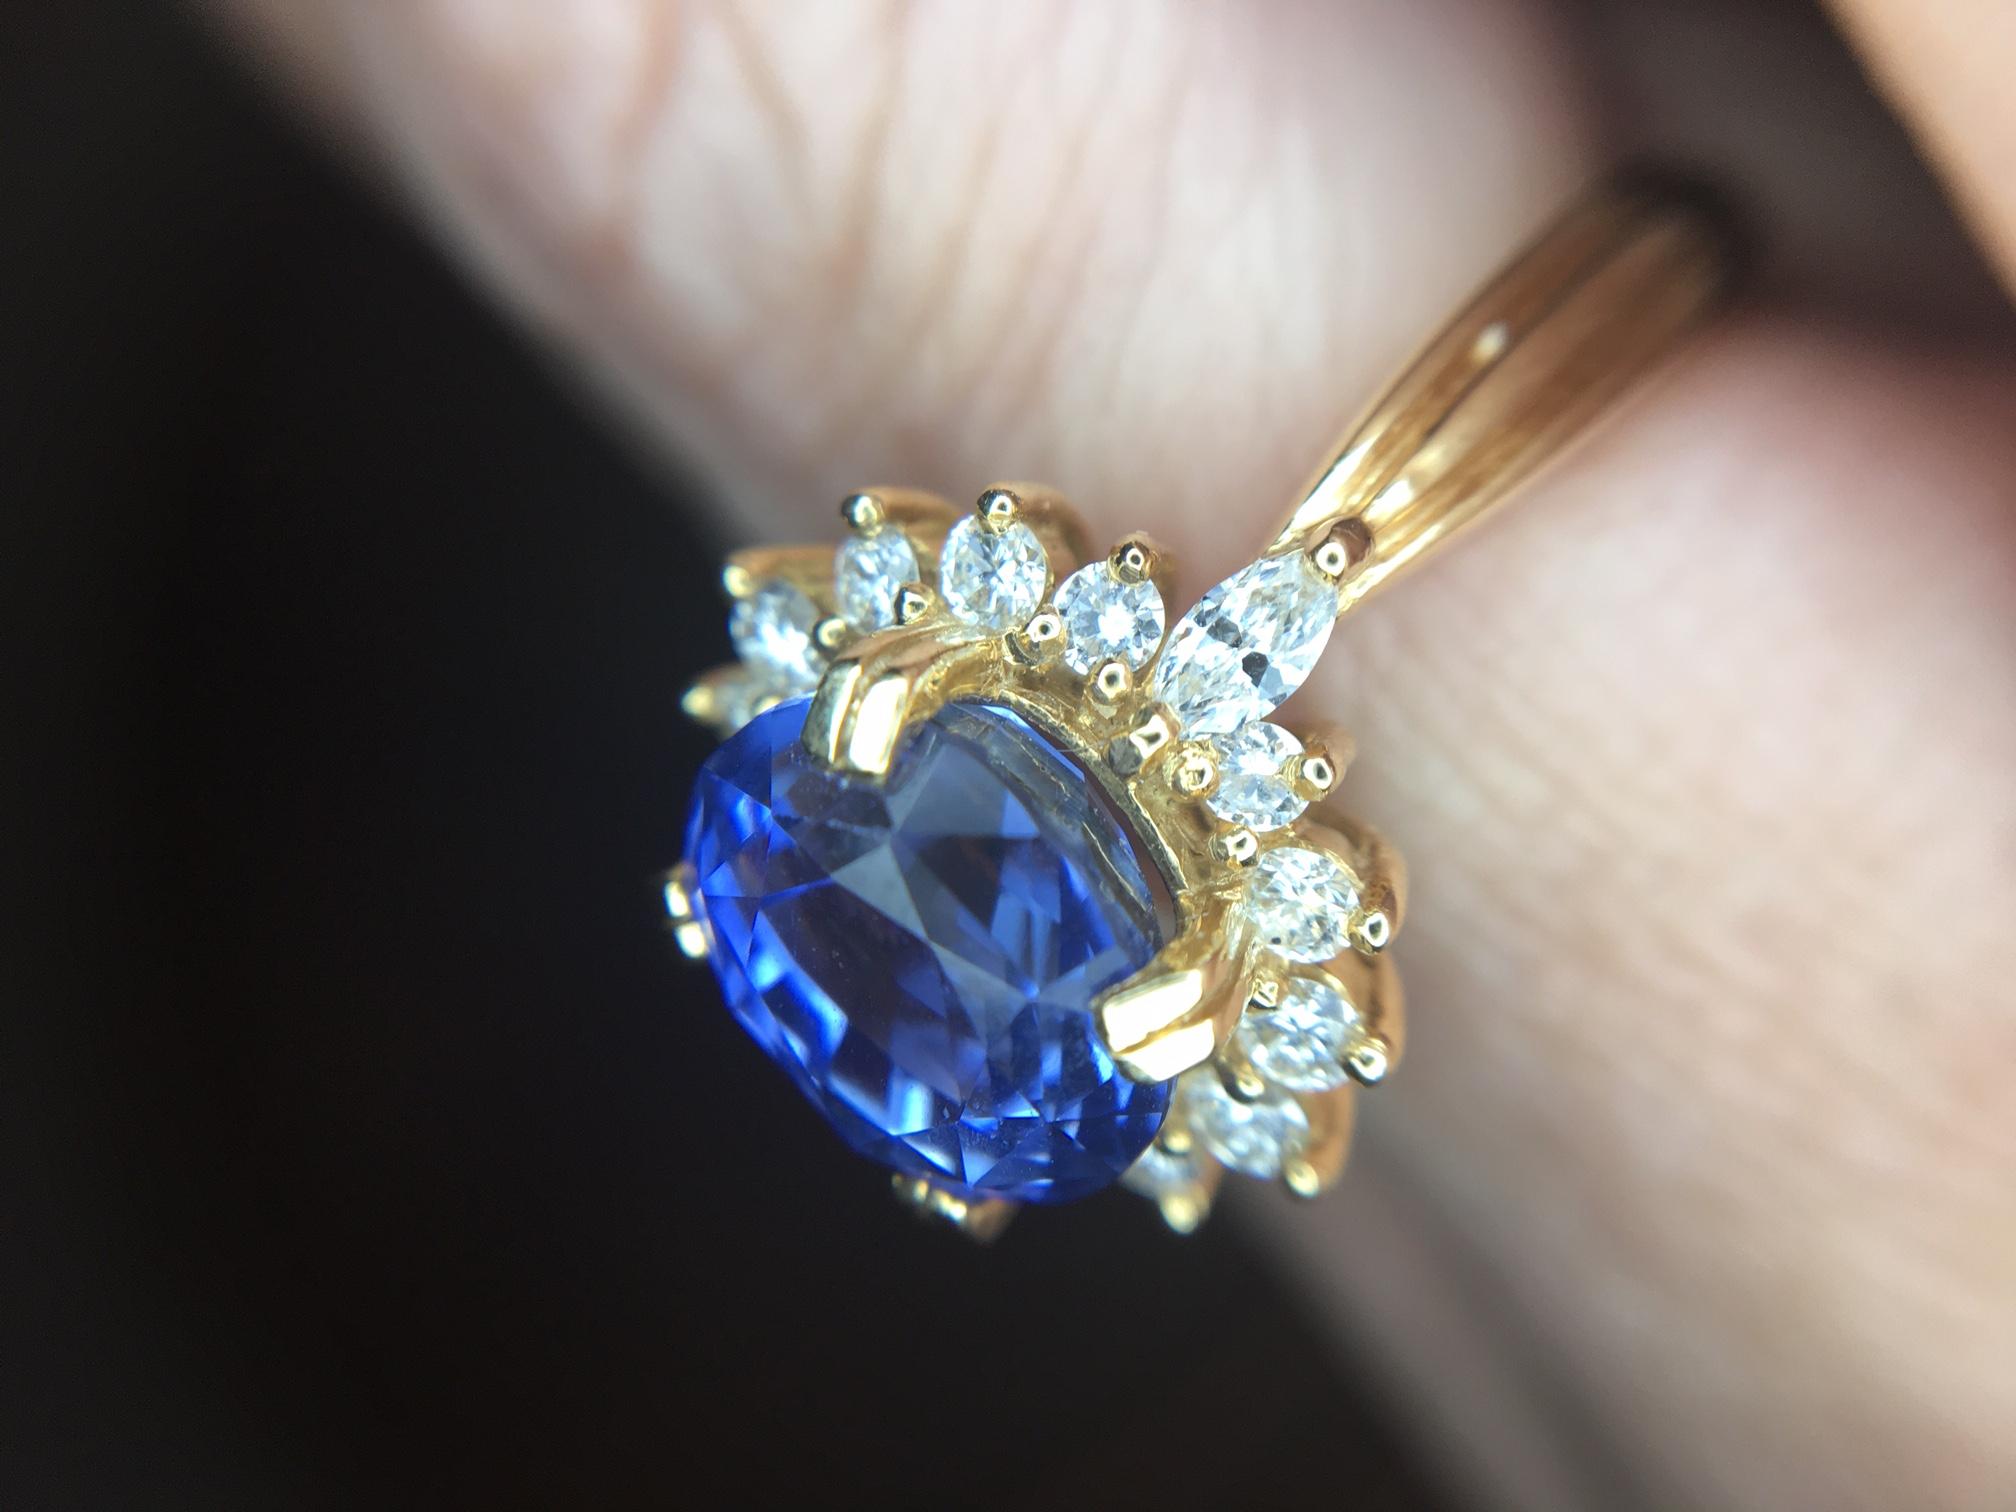 18k Gold 4.34cts Genuine Natural Ceylon Sapphire and Diamond Ring '#J3398' For Sale 2